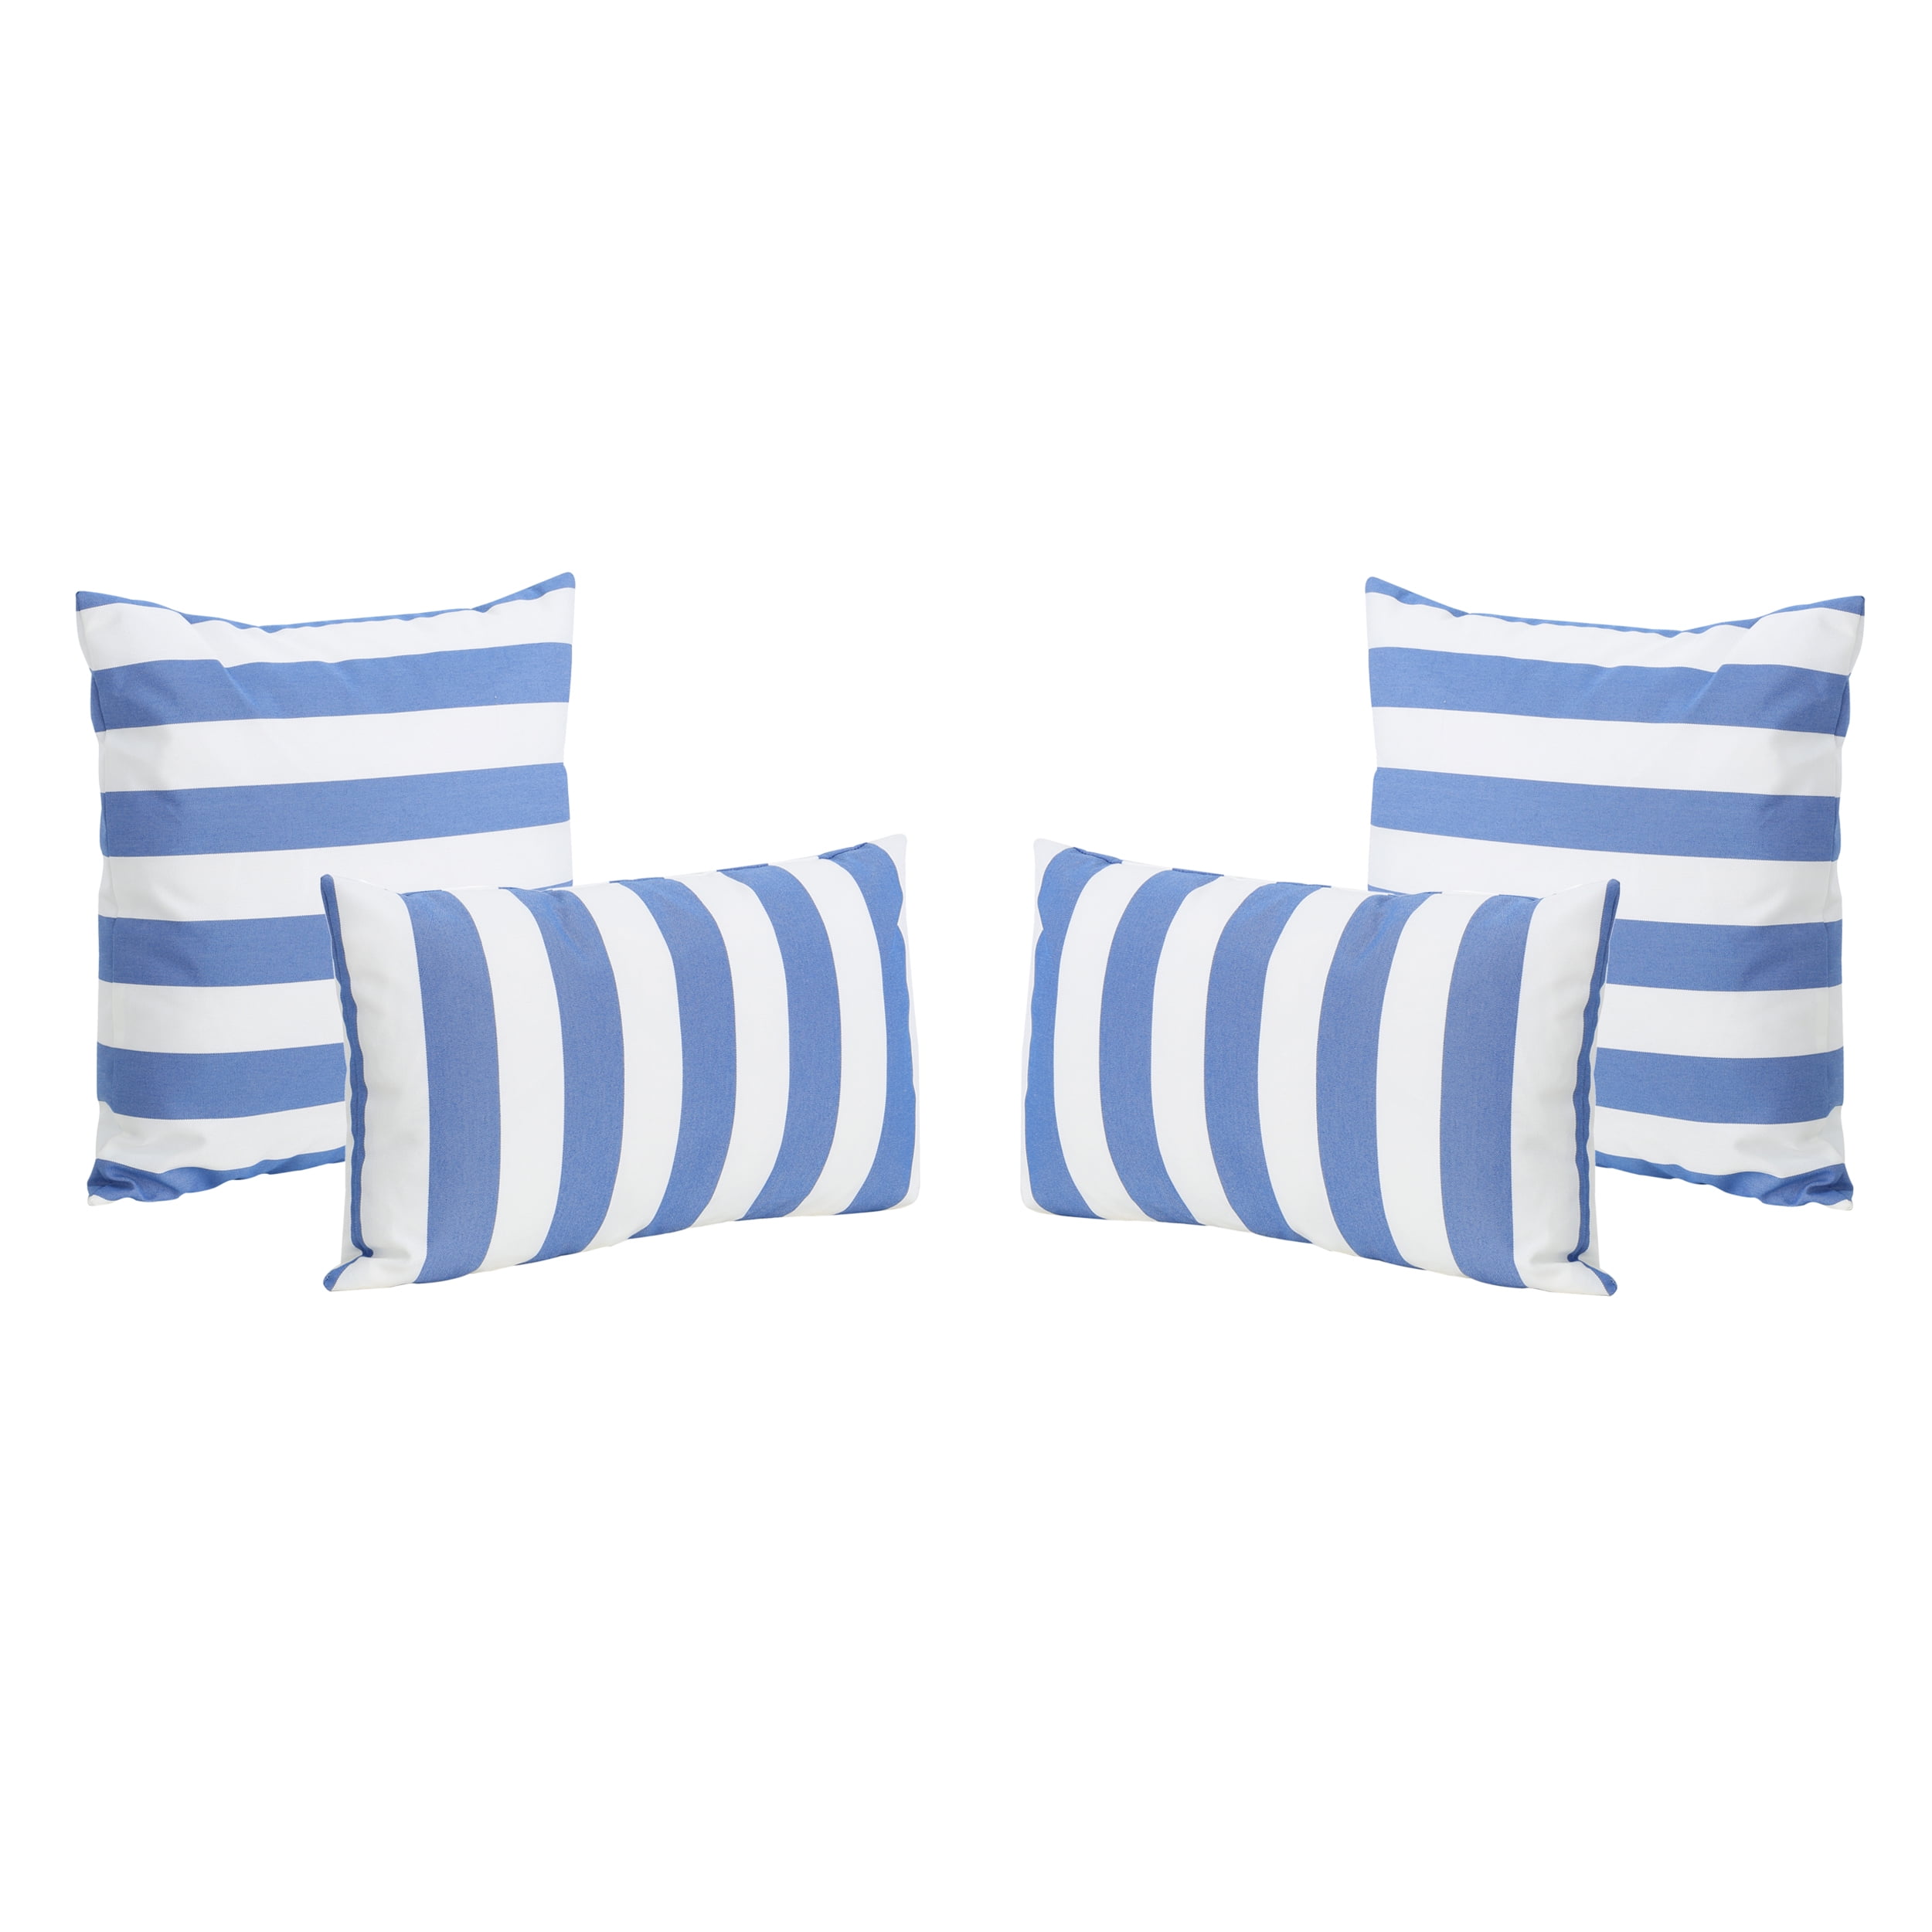 Home Decorators Collection Navy Stripe Piped-Edge 18 in. x 18 in. Square  Decorative Throw Pillow S00161061284 - The Home Depot